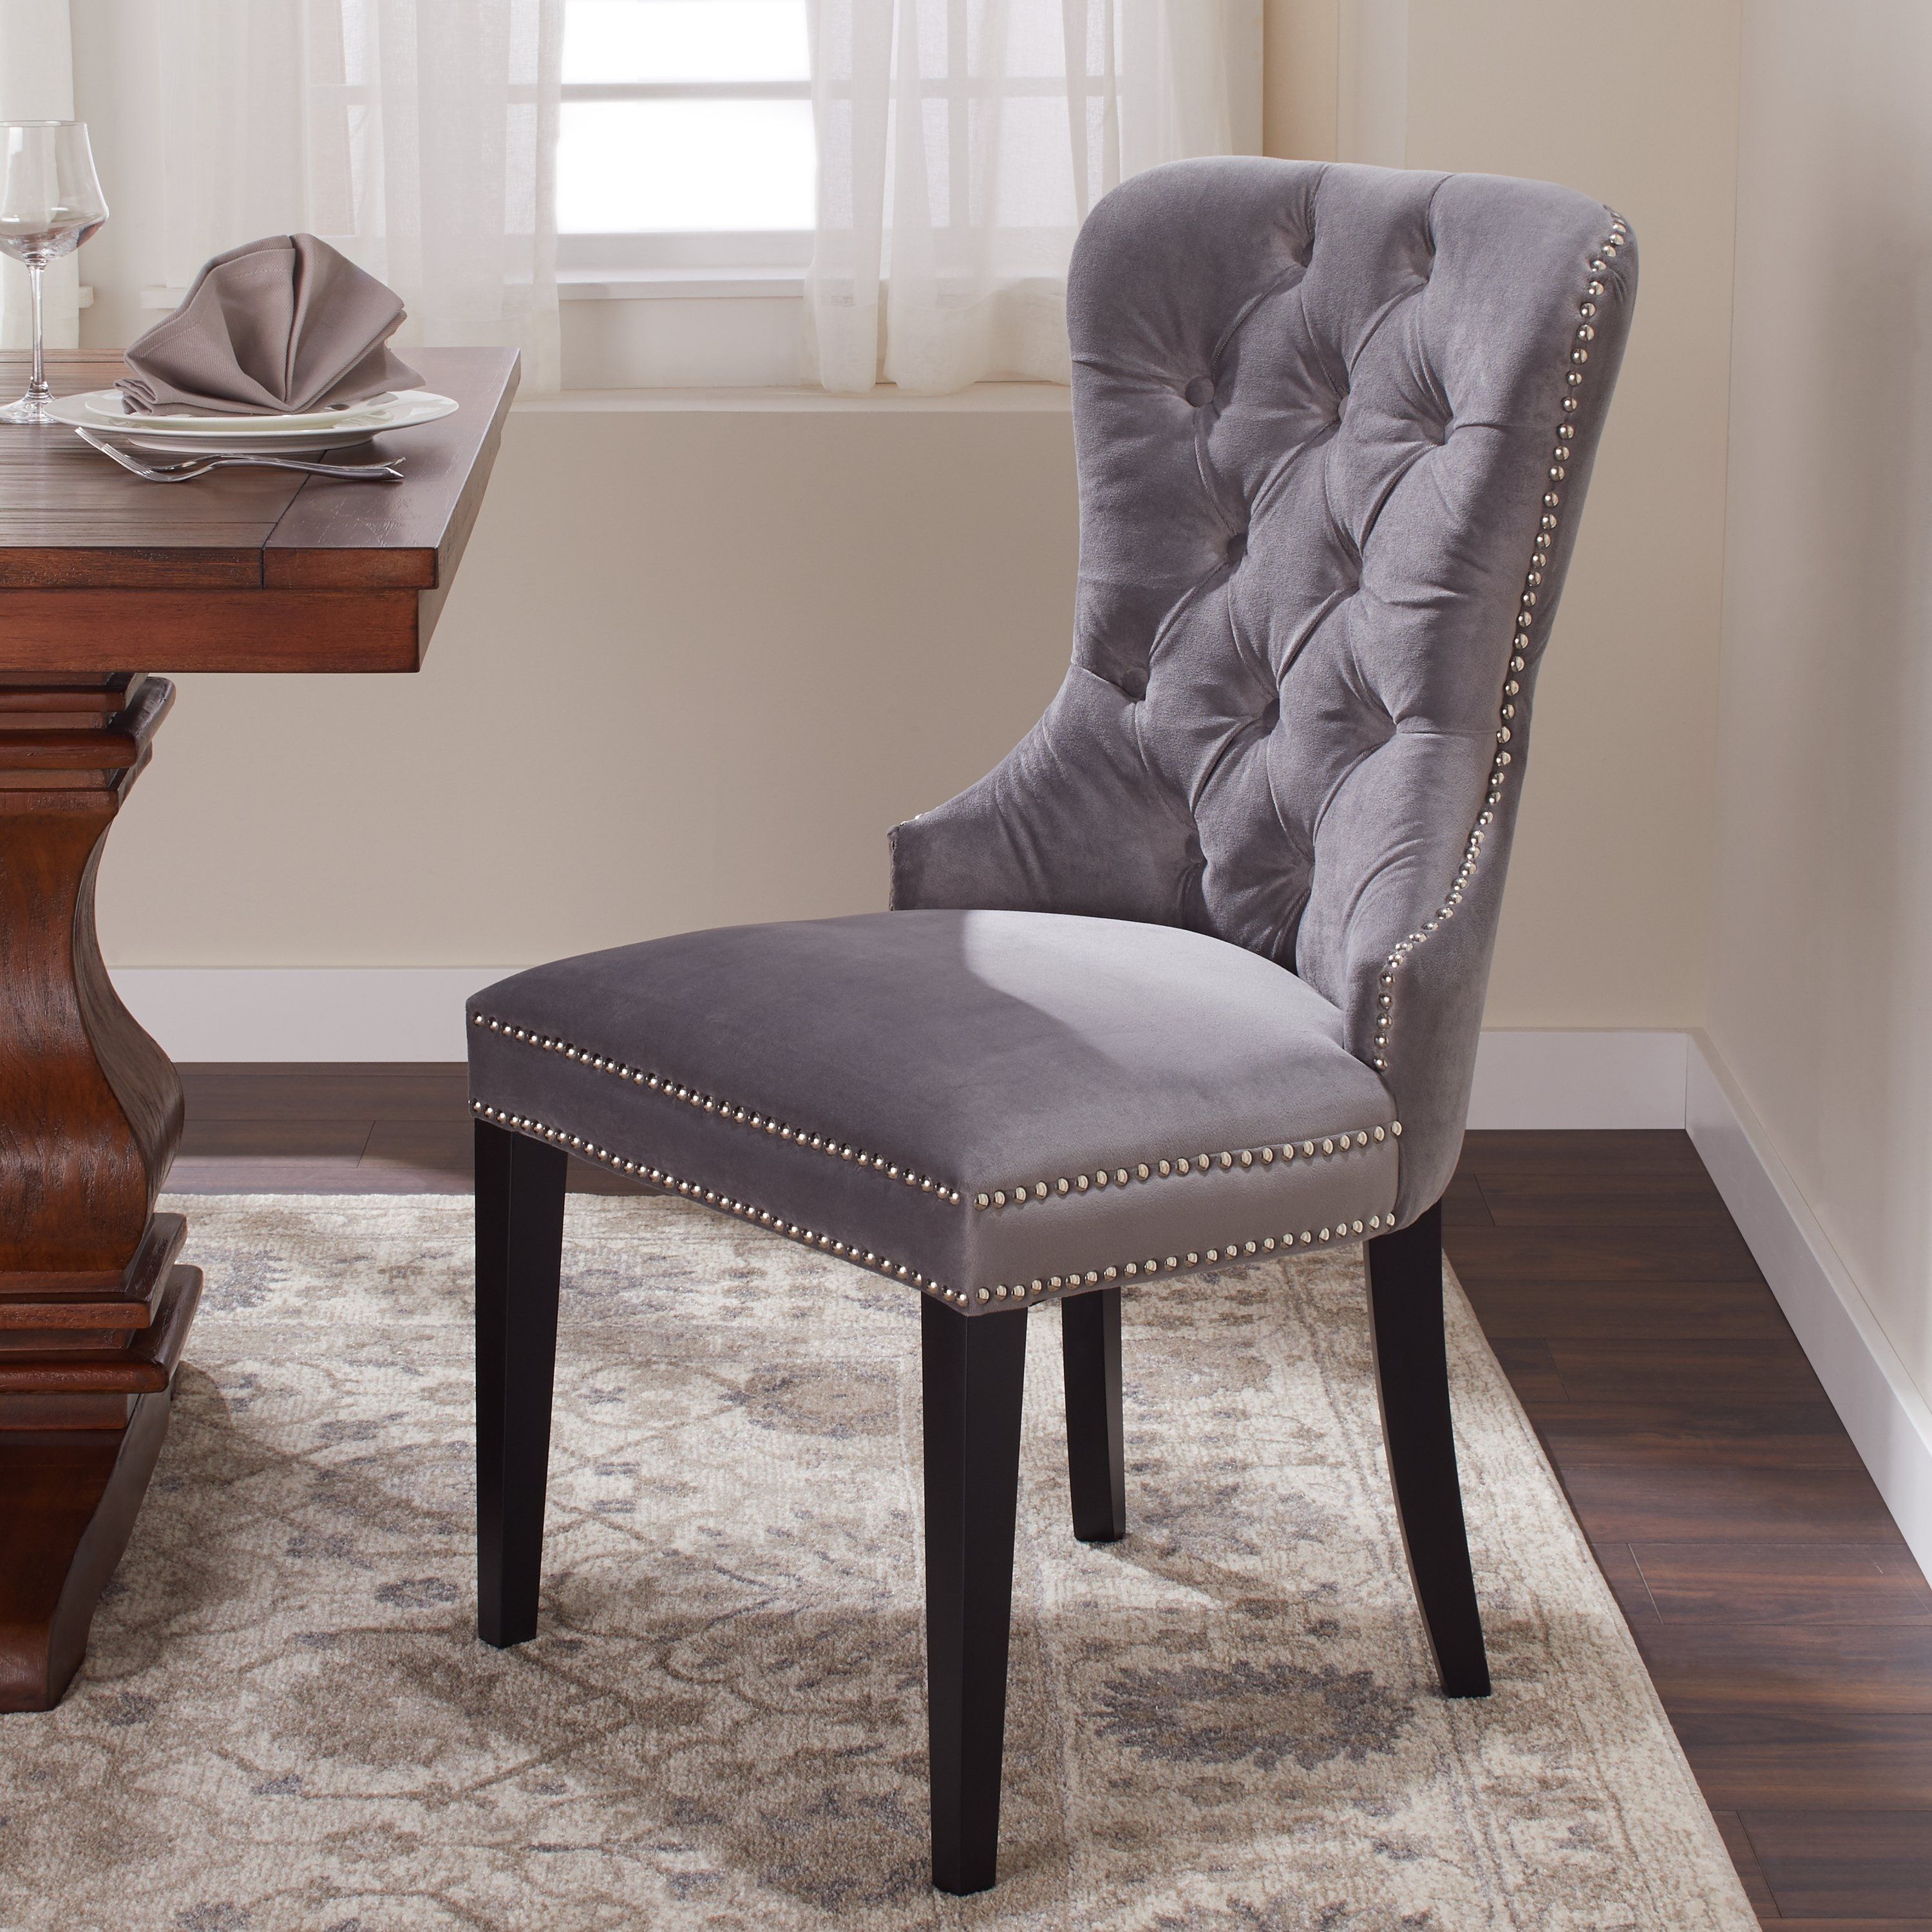 Most Current Shop Abbyson Versailles Grey Tufted Dining Chair – On Sale – Free Within Grey Dining Chairs (View 6 of 20)